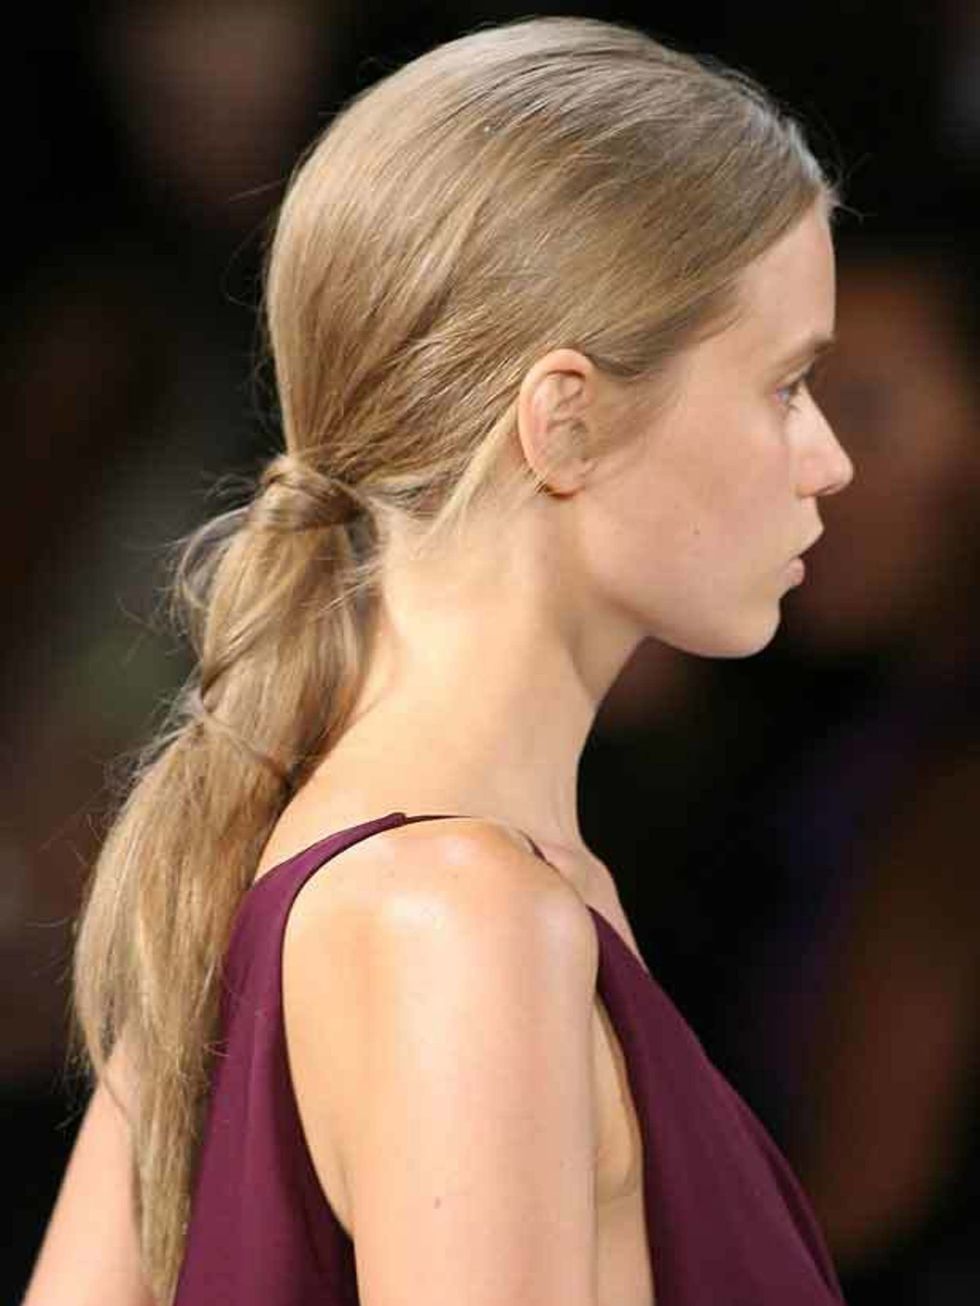 <p><a href="http://features.elleuk.com/fashion_week/160-4-Max-Azria-spring-summer-2009.html">Click here to see the Maz Azria show.</a></p>